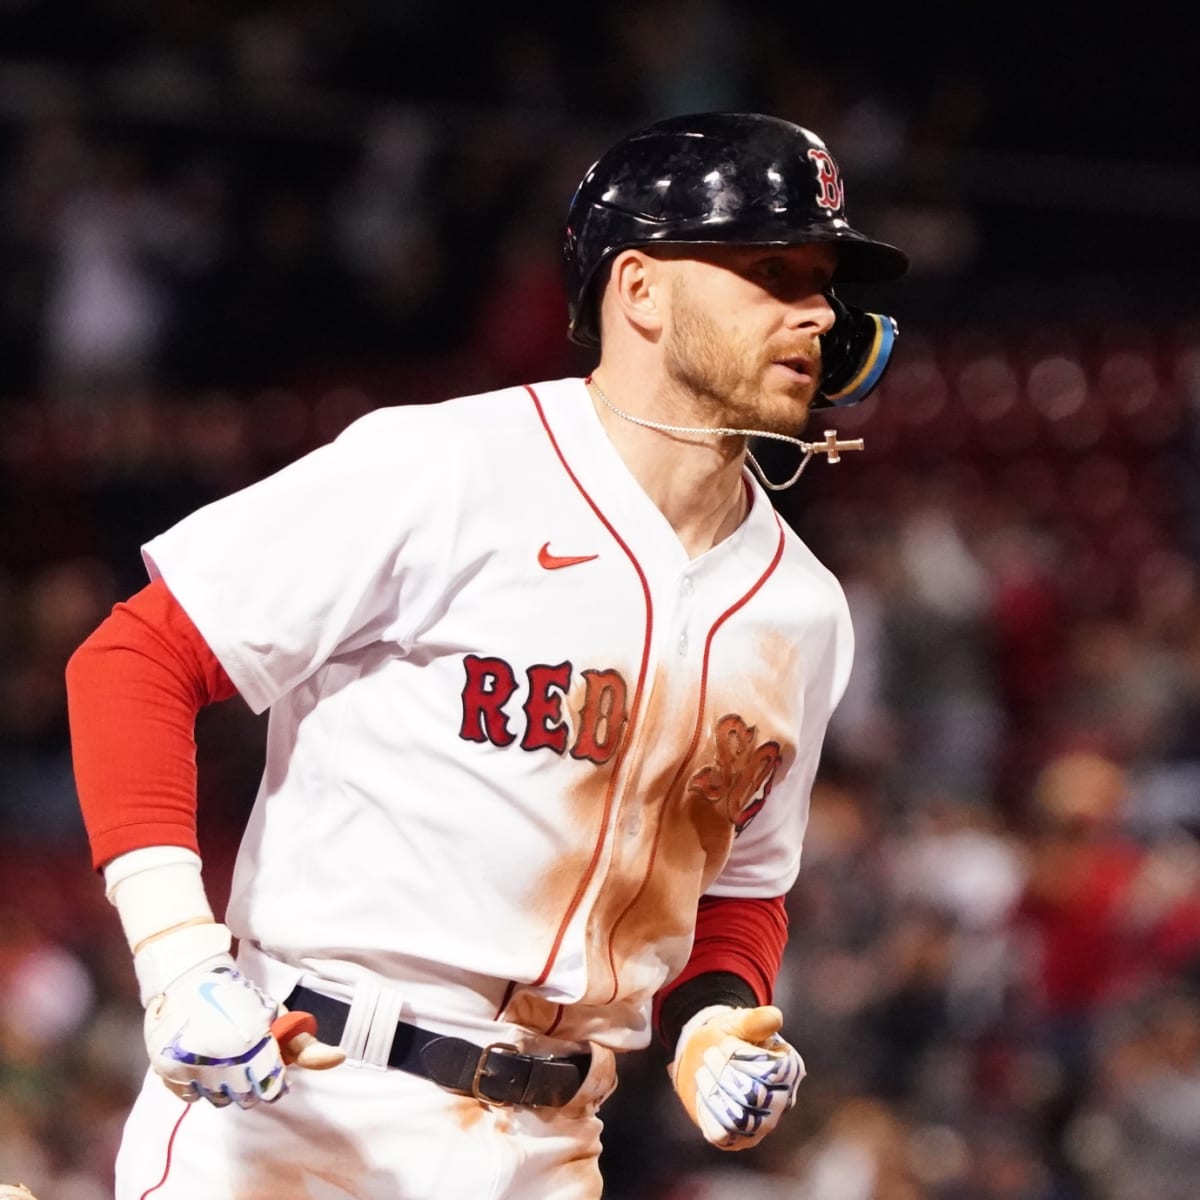 WATCH: Trevor Story Hits Third Home Run of Night for Red Sox